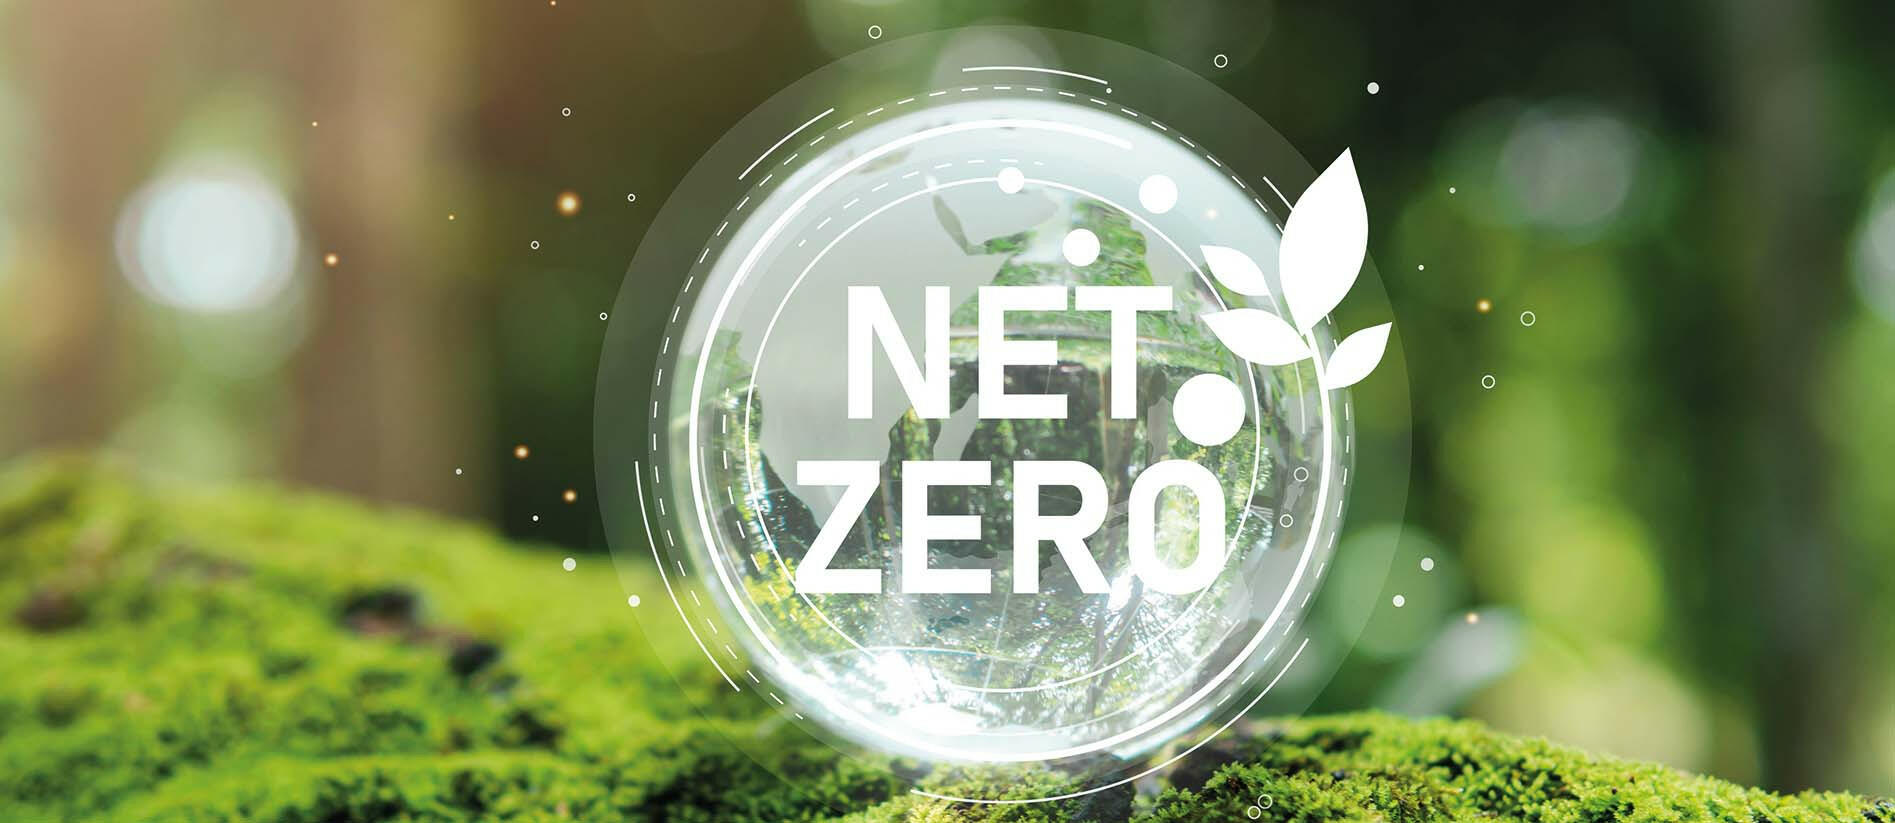 Tax policy options: achieving net zero commitments